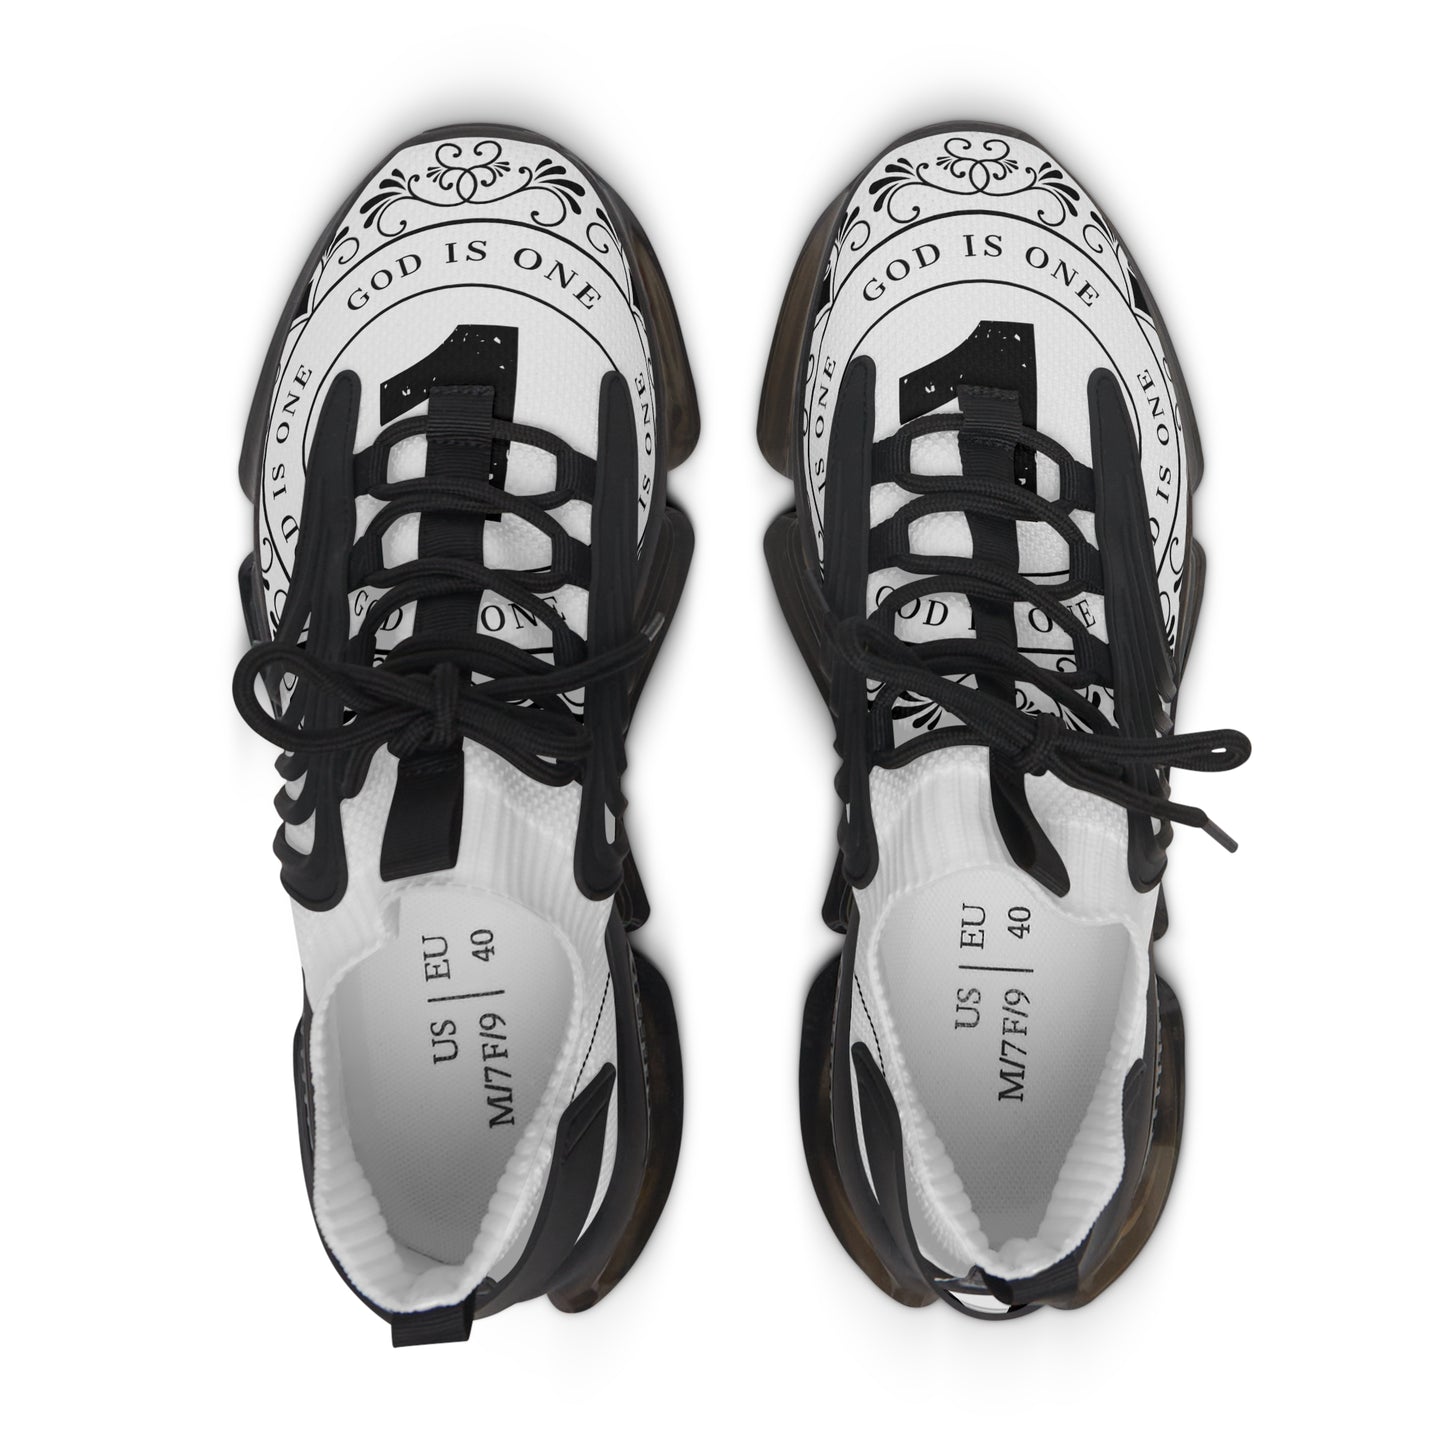 Unisex Mesh Sneakers God is One 04